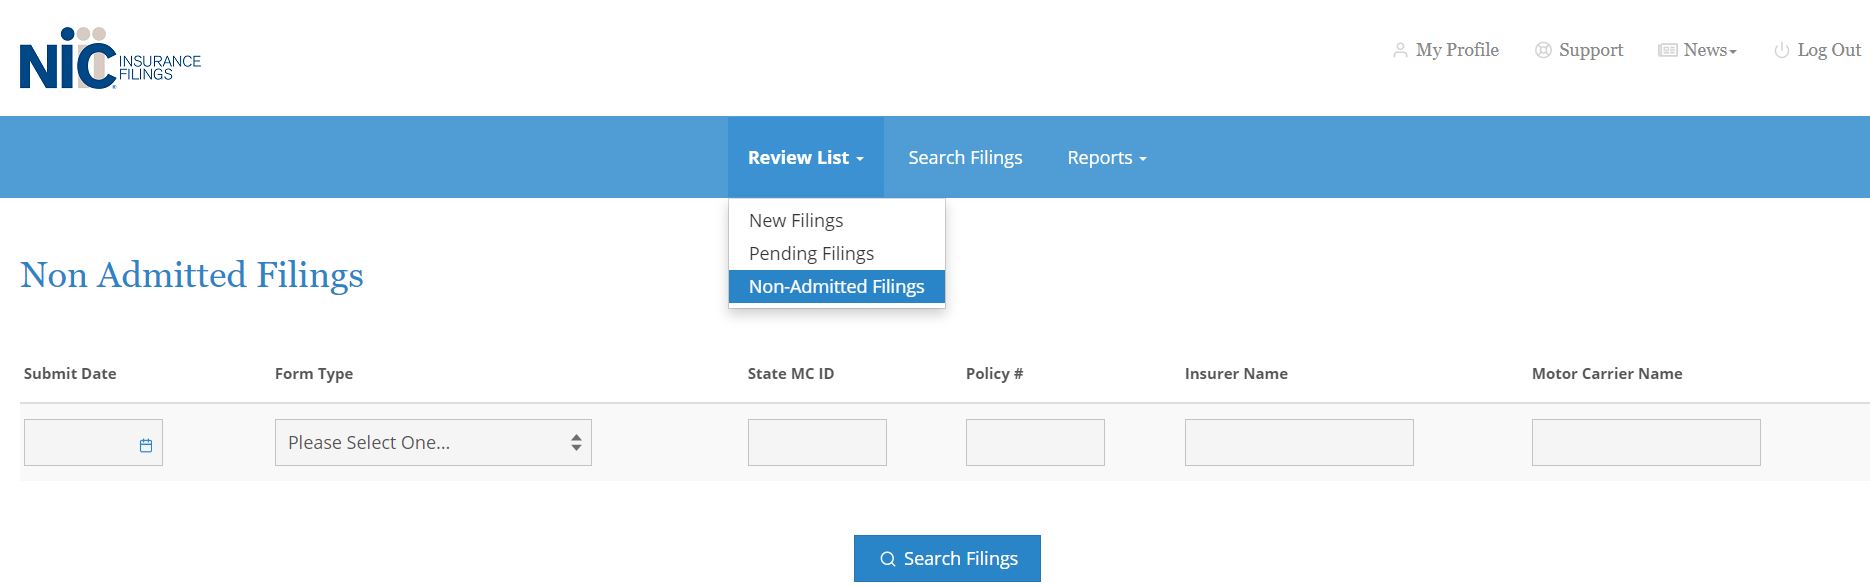 Screenshot of interface for non-admitted filings page.